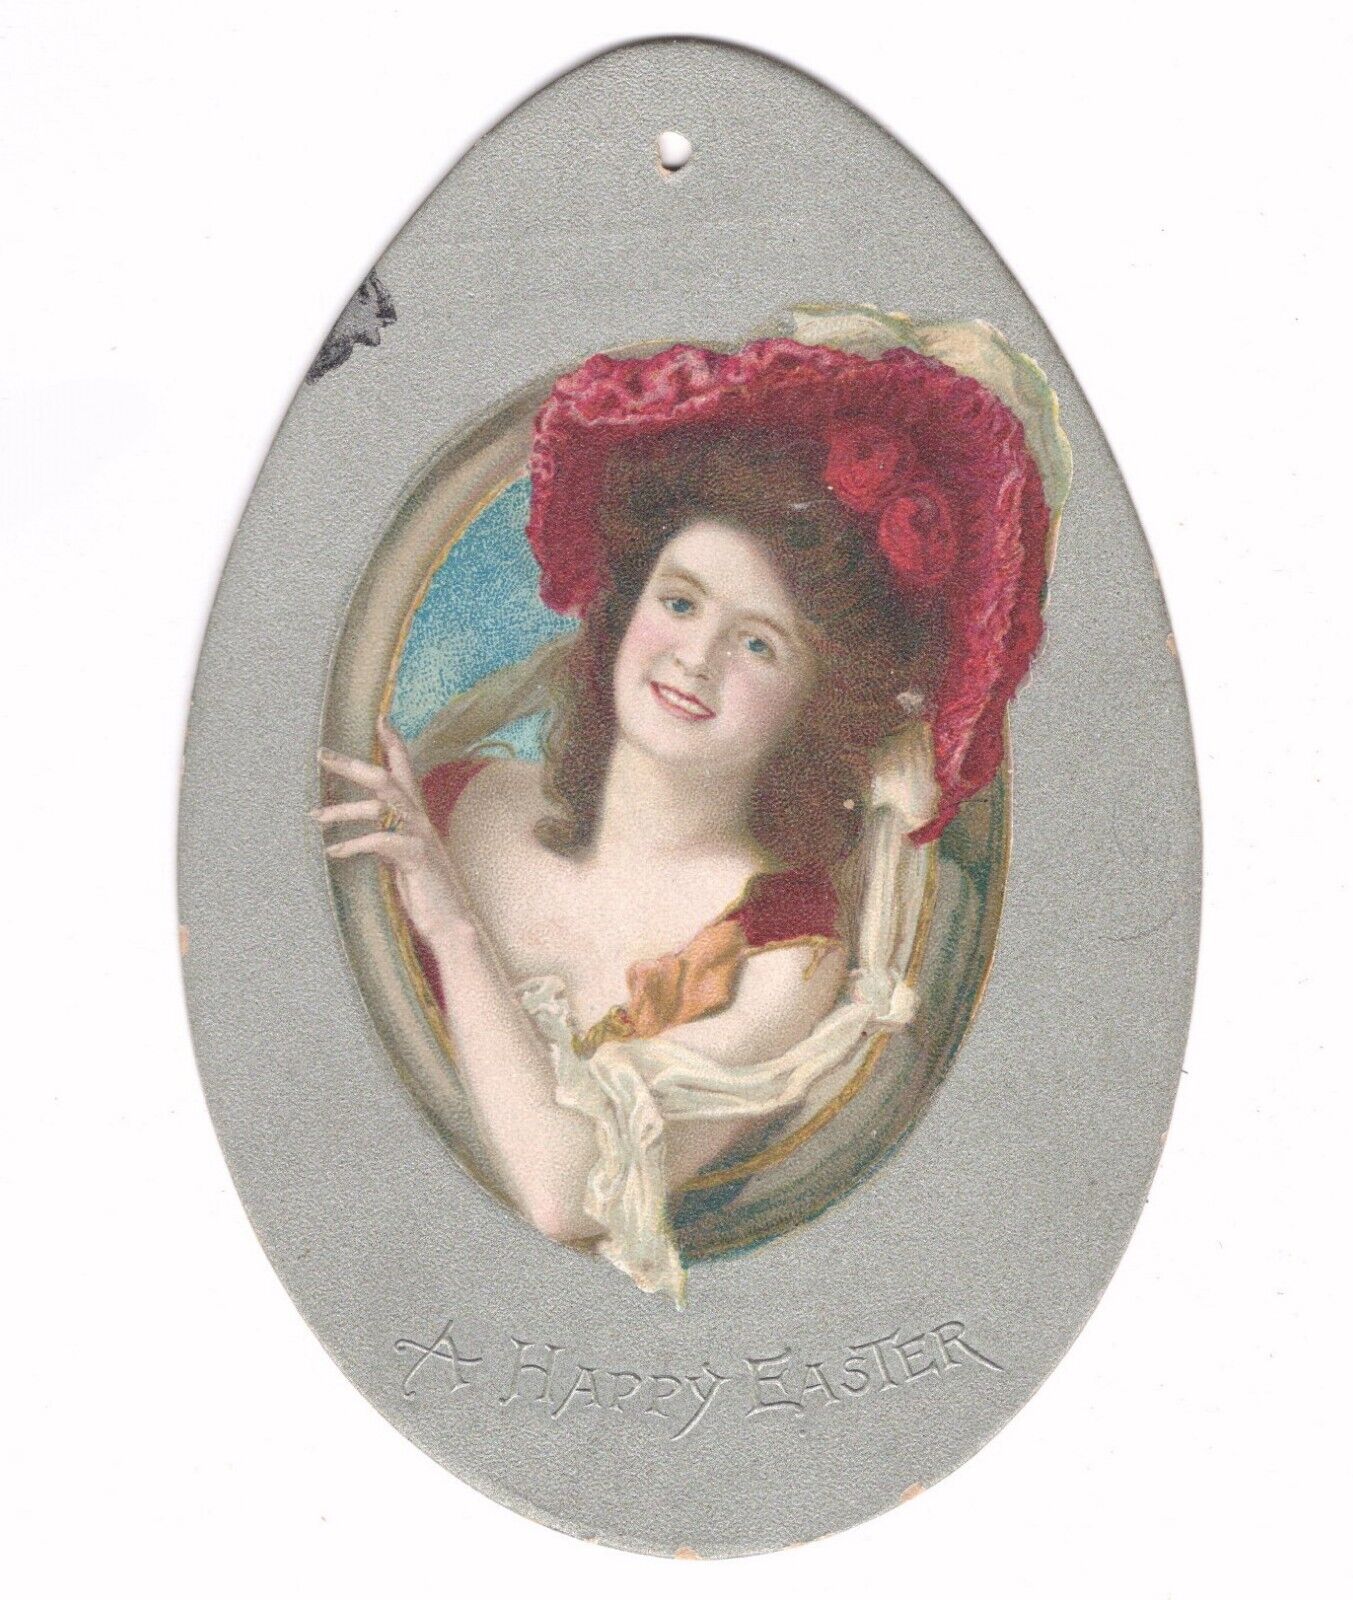 VICTORIAN DANCE CARD - A HAPPY EASTER - GIRL IN LARGE RED HAT EGG SHAPED UNUSED